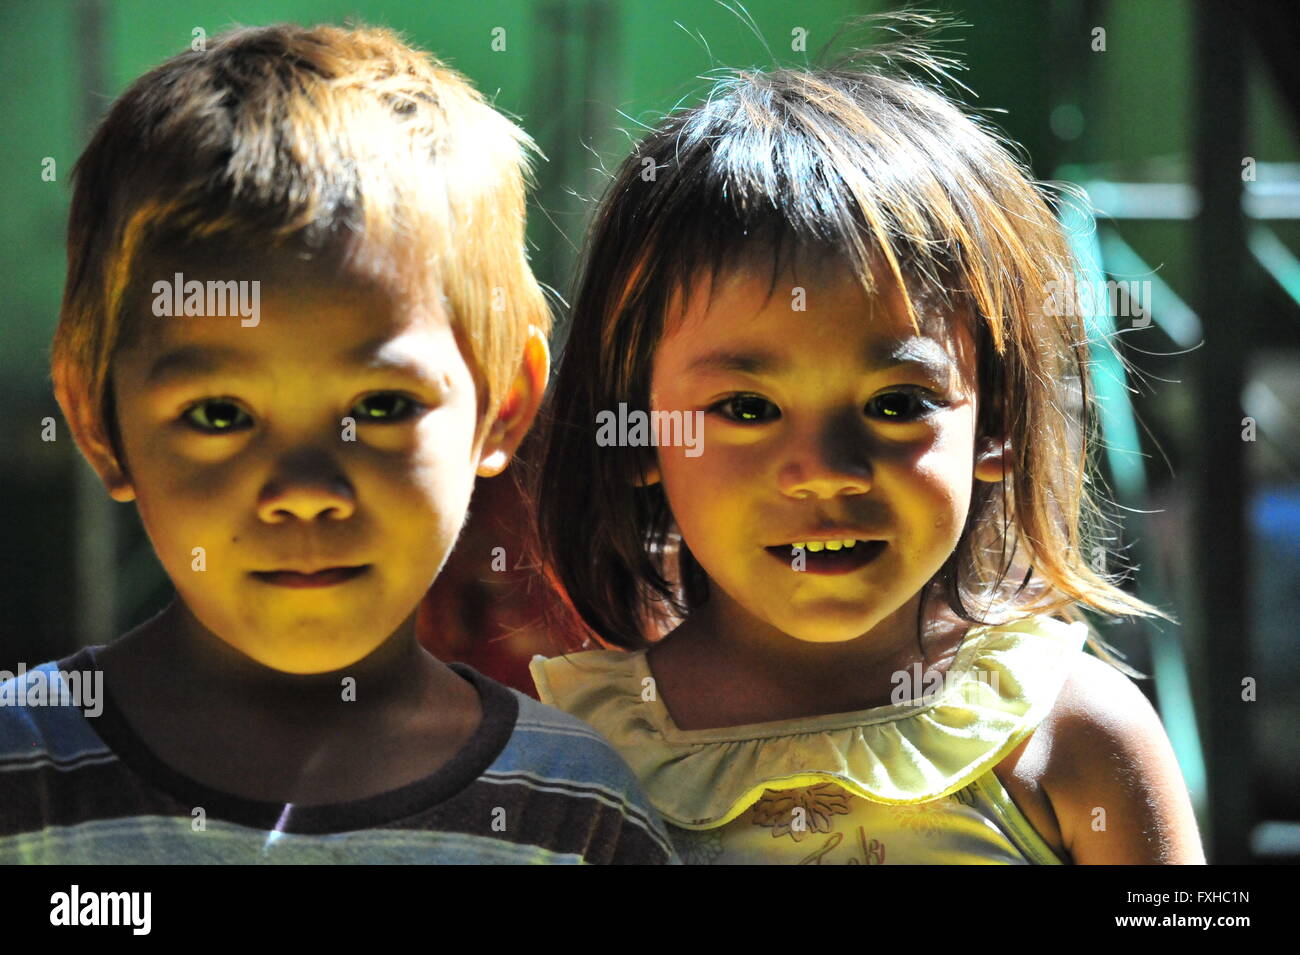 Children in the Barangay Sports Arena, Cebu City, Philippines. Editiorial use only. Stock Photo